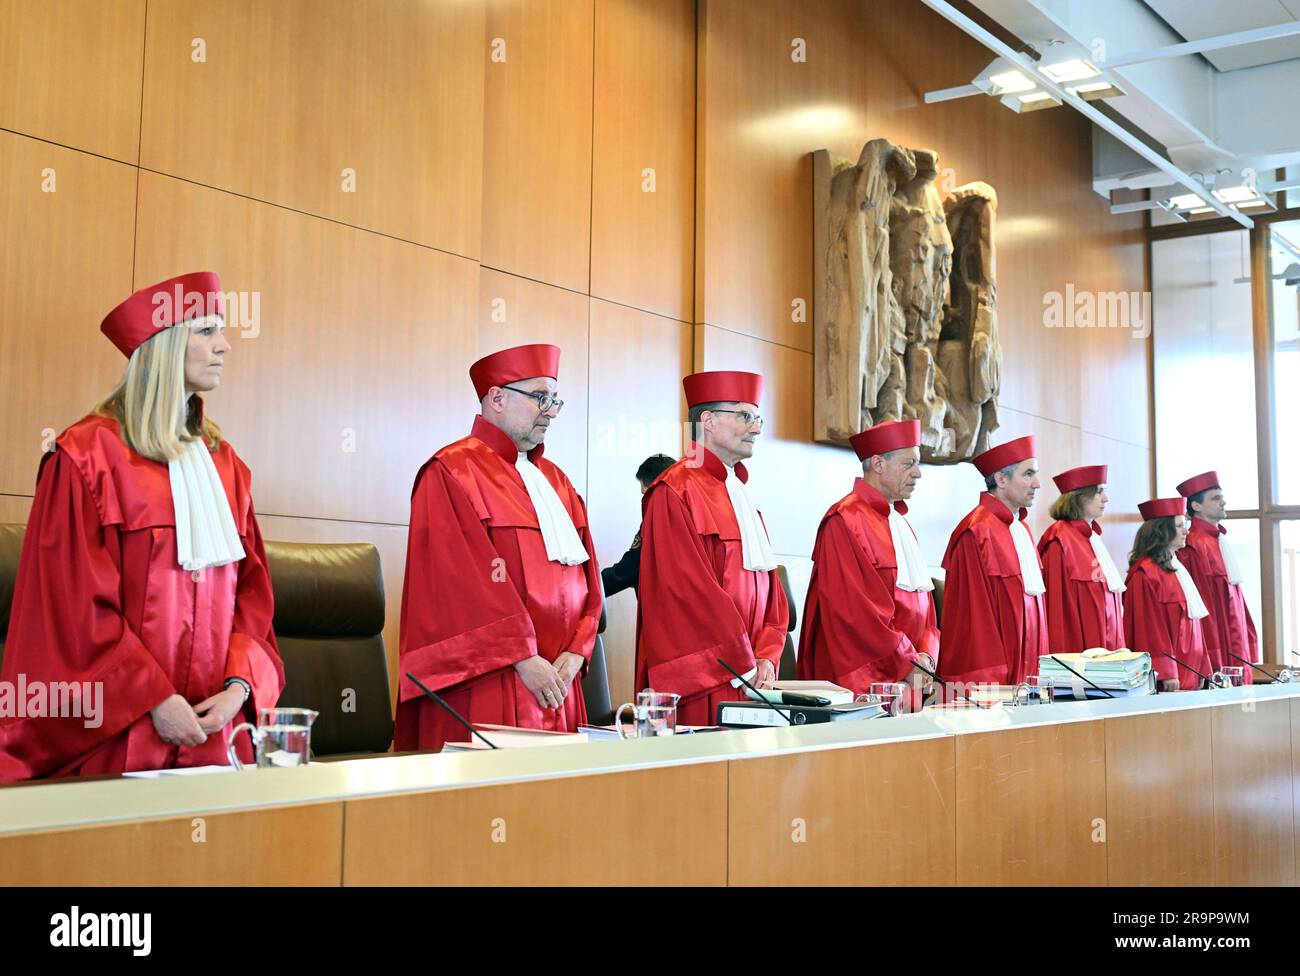 Karlsruhe, Germany. 28th June, 2023. The First Senate of the Federal Constitutional Court, Miriam Meßling (l-r), Heinrich Amadeus Wolff, Henning Radtke, Josef Christ, Stephan Harbarth, Chairman of the Senate and President of the Court, Yvonne Ott, Ines Härtel and Martin Eifert, opens the oral proceedings on report cards for dyslexics. The question at issue is whether dyslexics must accept a report card stating that their spelling performance was not included in their grades. Credit: Uli Deck/dpa/Alamy Live News Stock Photo